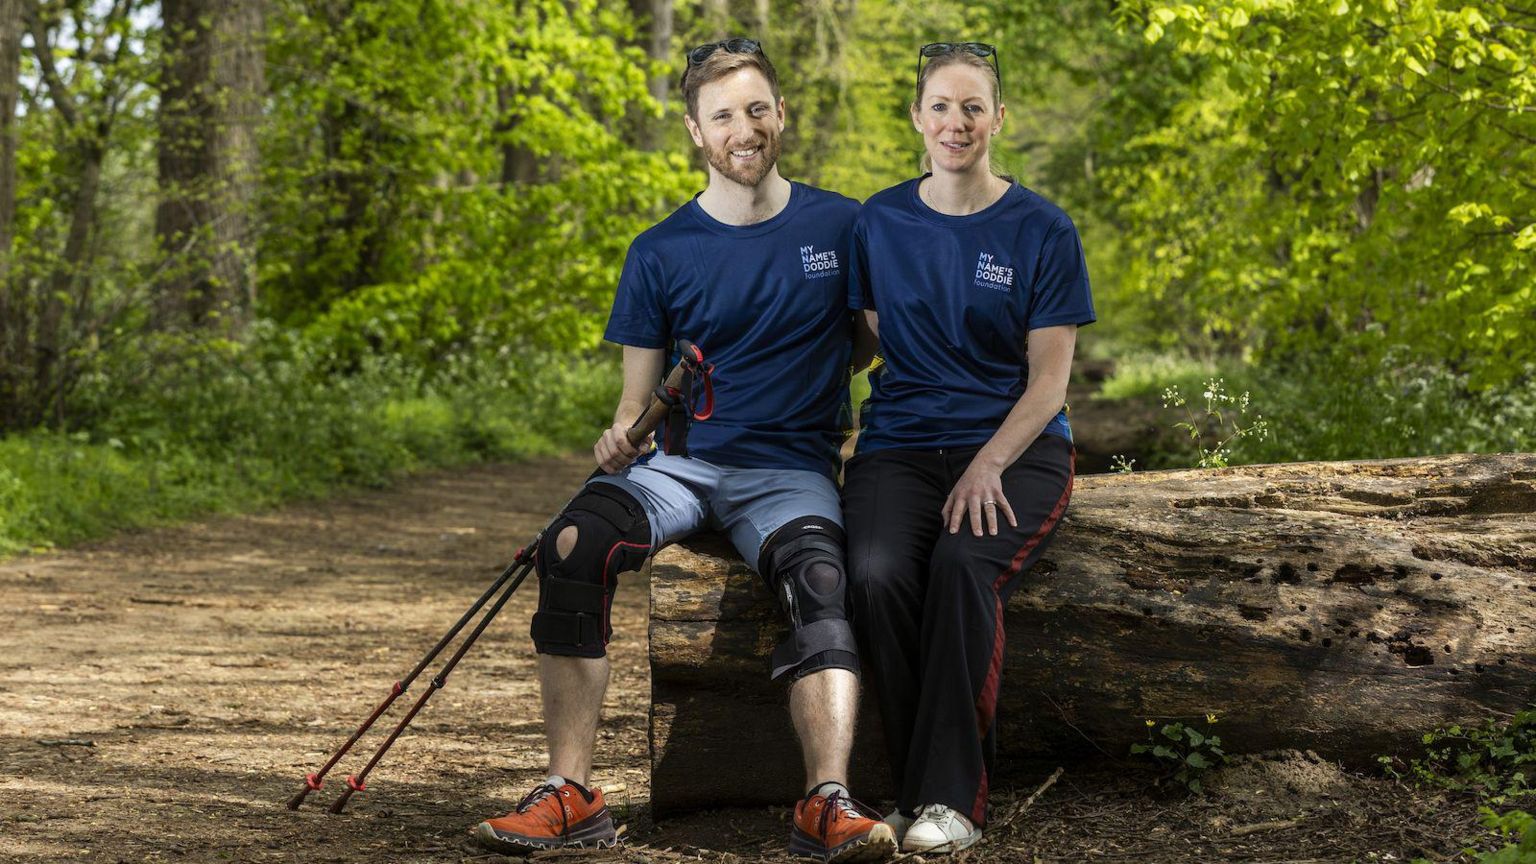 Dr Hames-Brown and his wife, Kate, sitting on a log in a forest